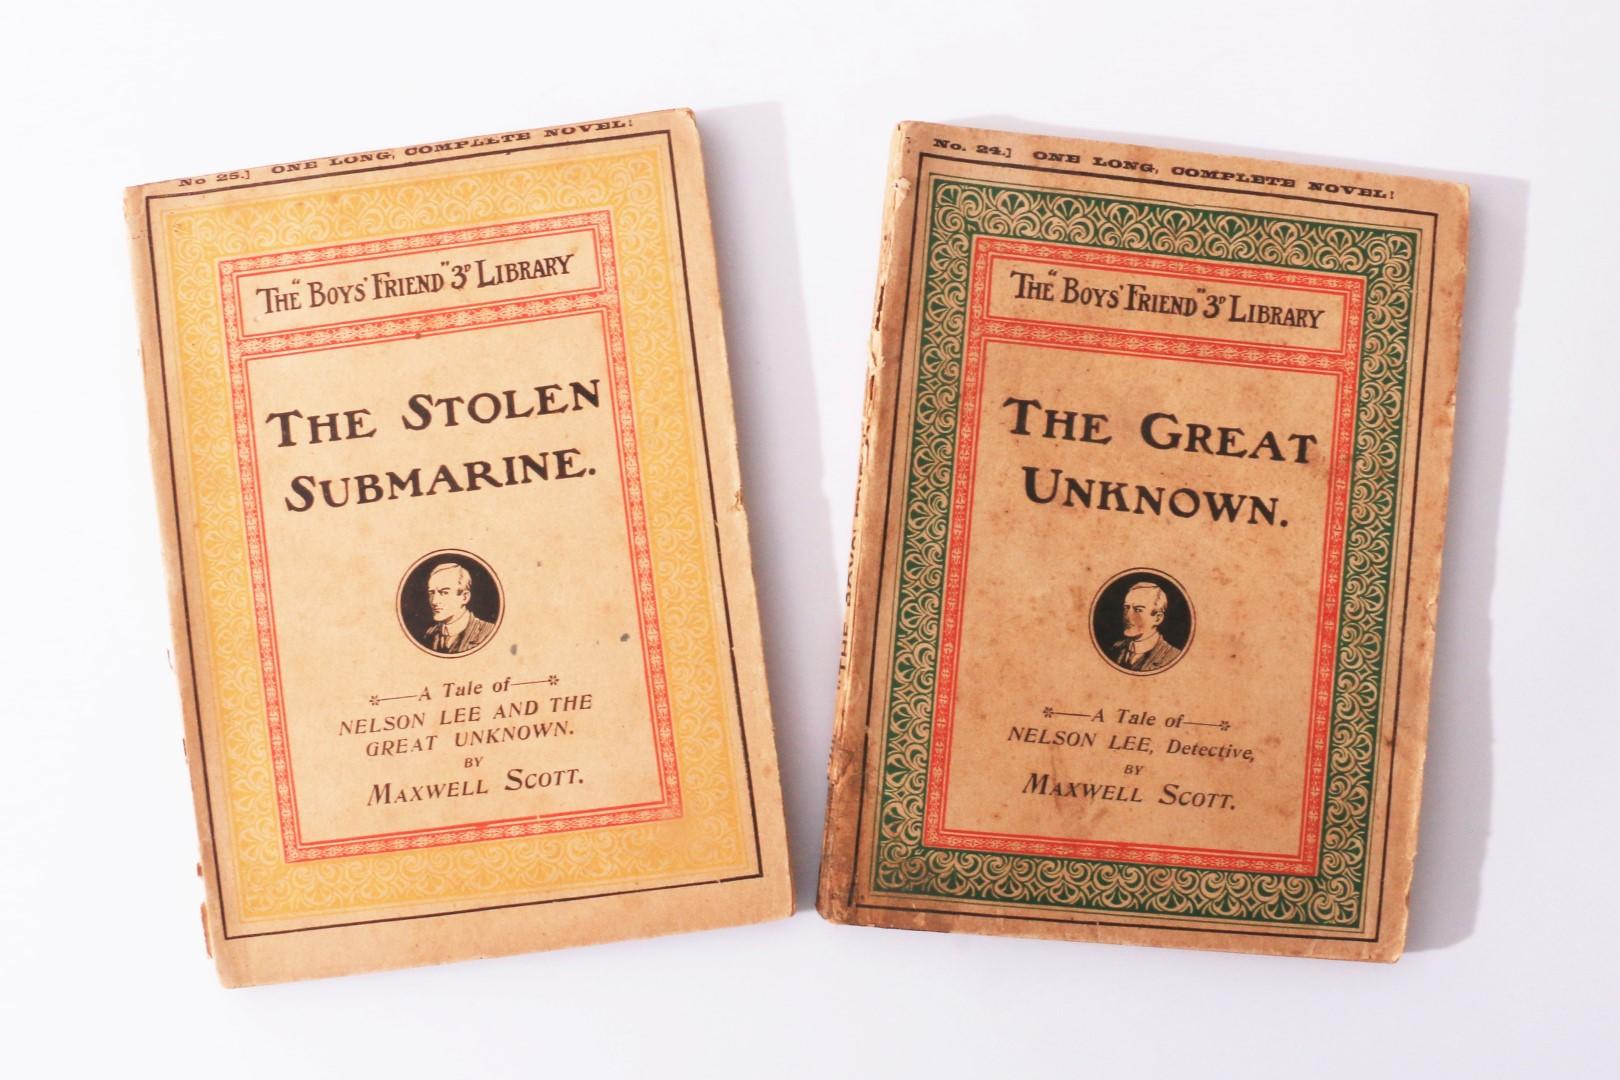 Maxwell Scott - The Great Unknown and The Stolen Submarine, both published in The Boys Friend 3d Library - Amalgamated Library, 1907, First Edition.